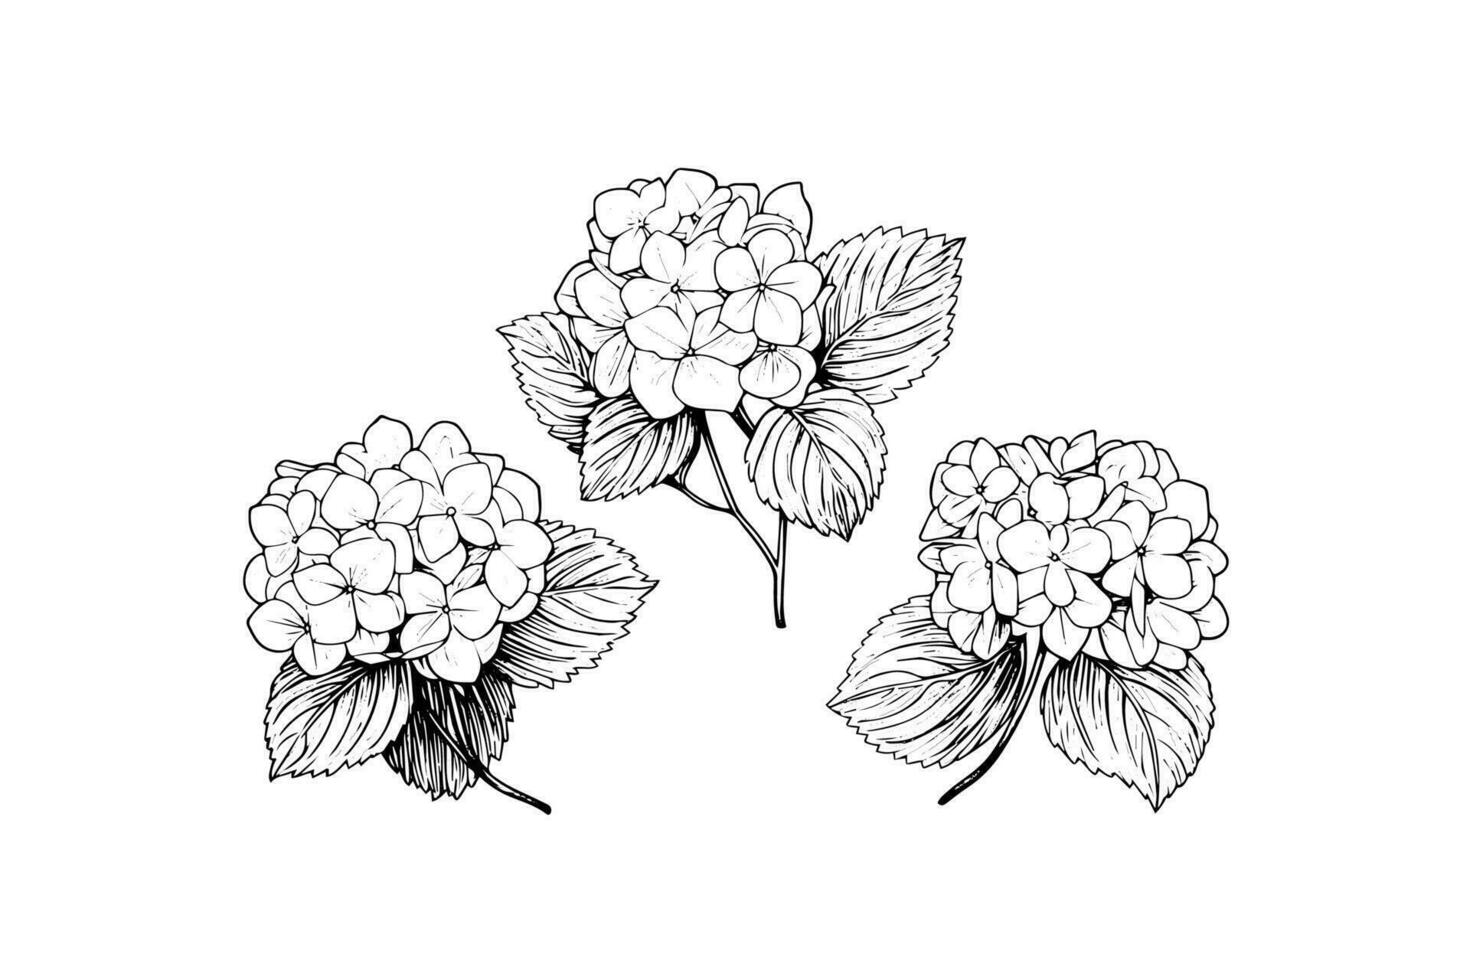 Hand drawn ink sketch hydrangea flowers. Vector illustration in engraving style.